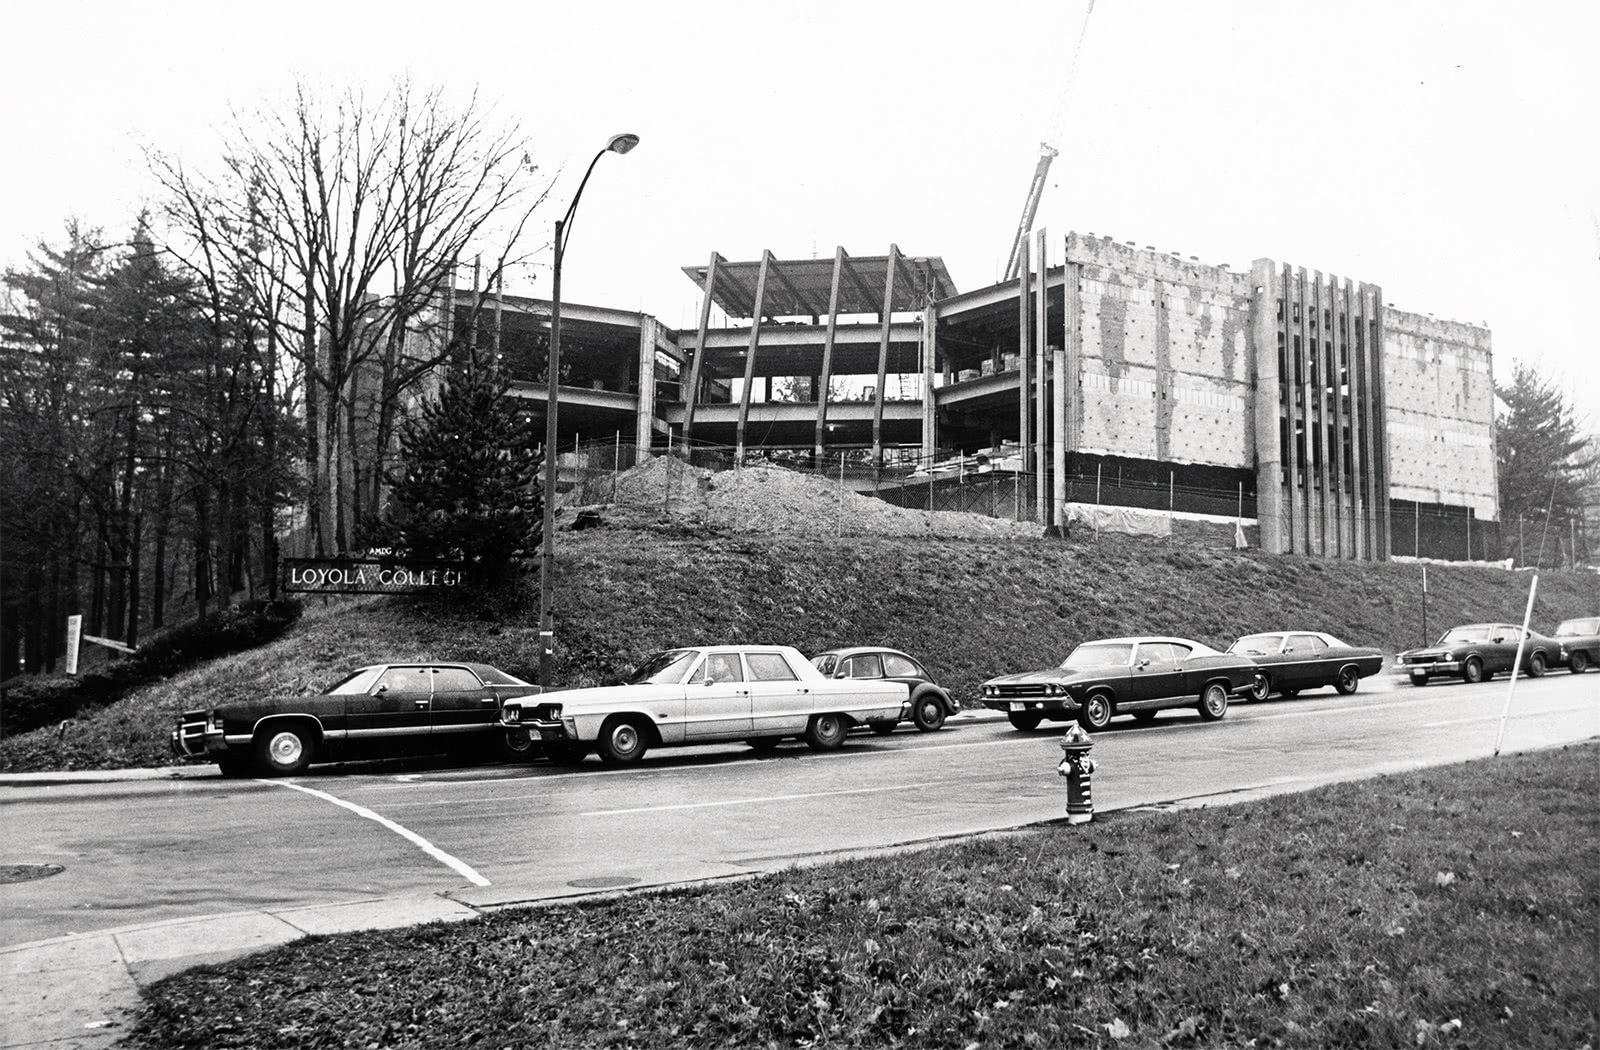 Vintage black and white photo of Donnelly Science Center under construction